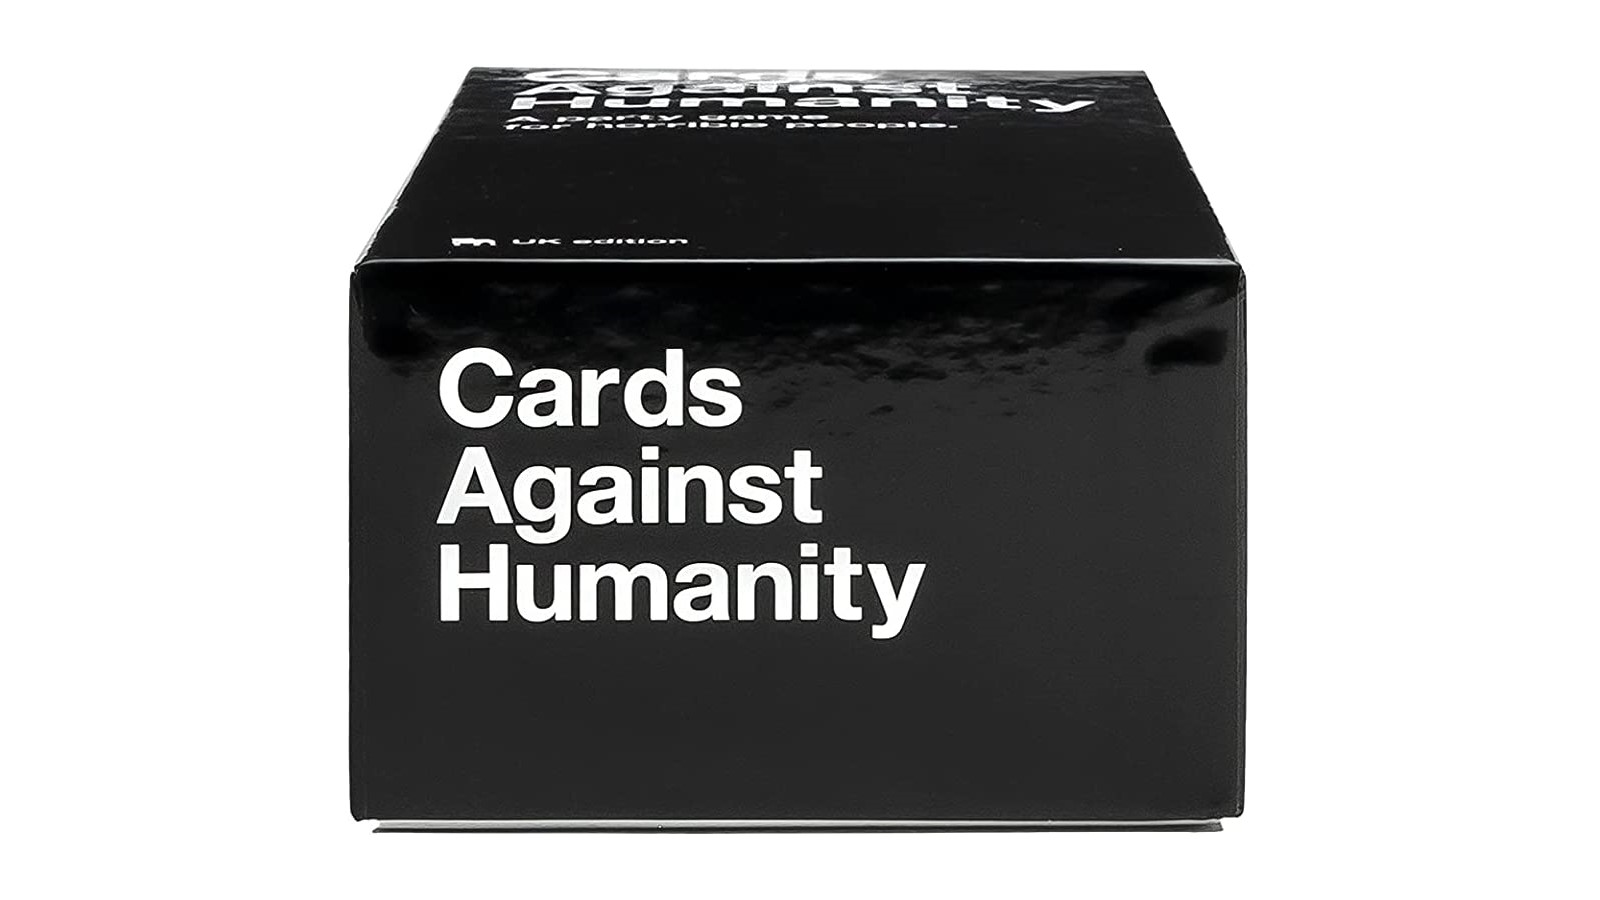 Drinking Card Games - Cards Against Humanity box